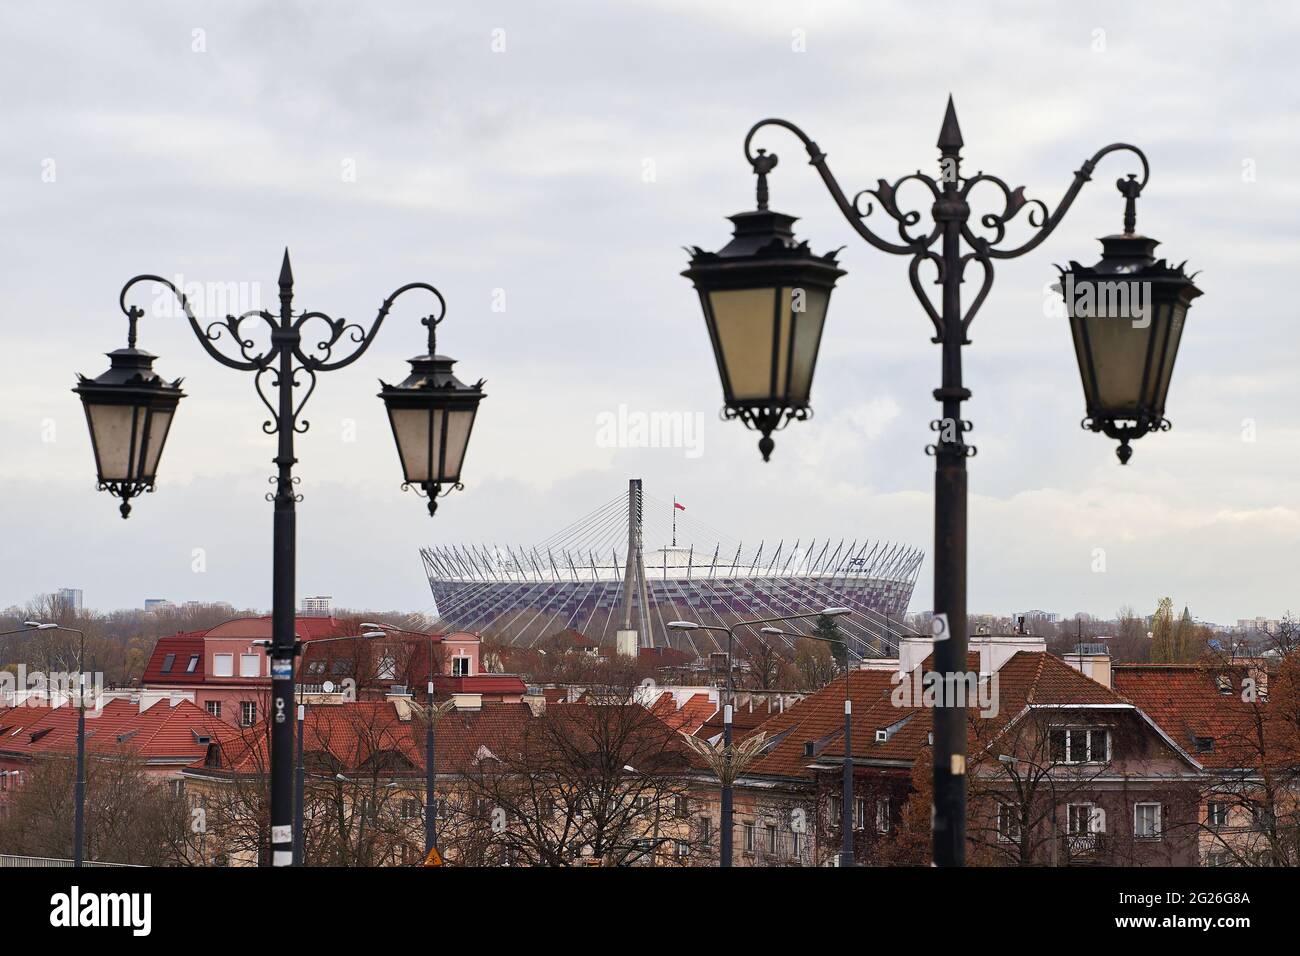 Warsaw, Poland, Nov 15, 2018: View of National Stadium, a retractable roof football stadium from the old city. Stock Photo